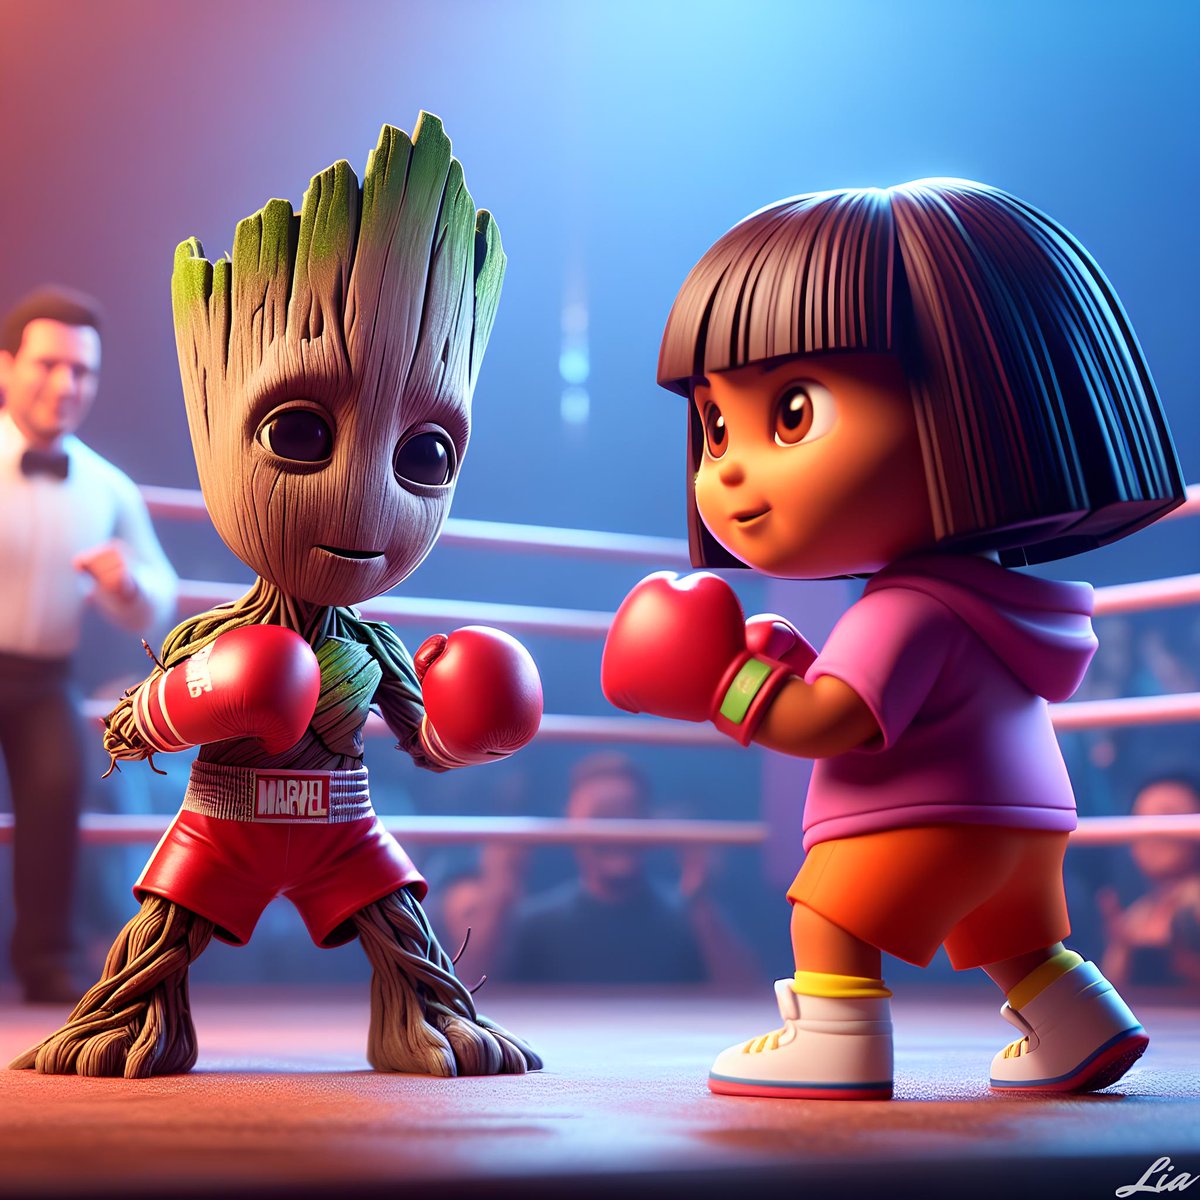 Baby Groot VS Dora l'exploratrice 😂😂😂
#AI #aiart #AIArtwork #AIgenerated #aiart #AIArtistCommunity #aiimages #aicreator #babygroot #Dora